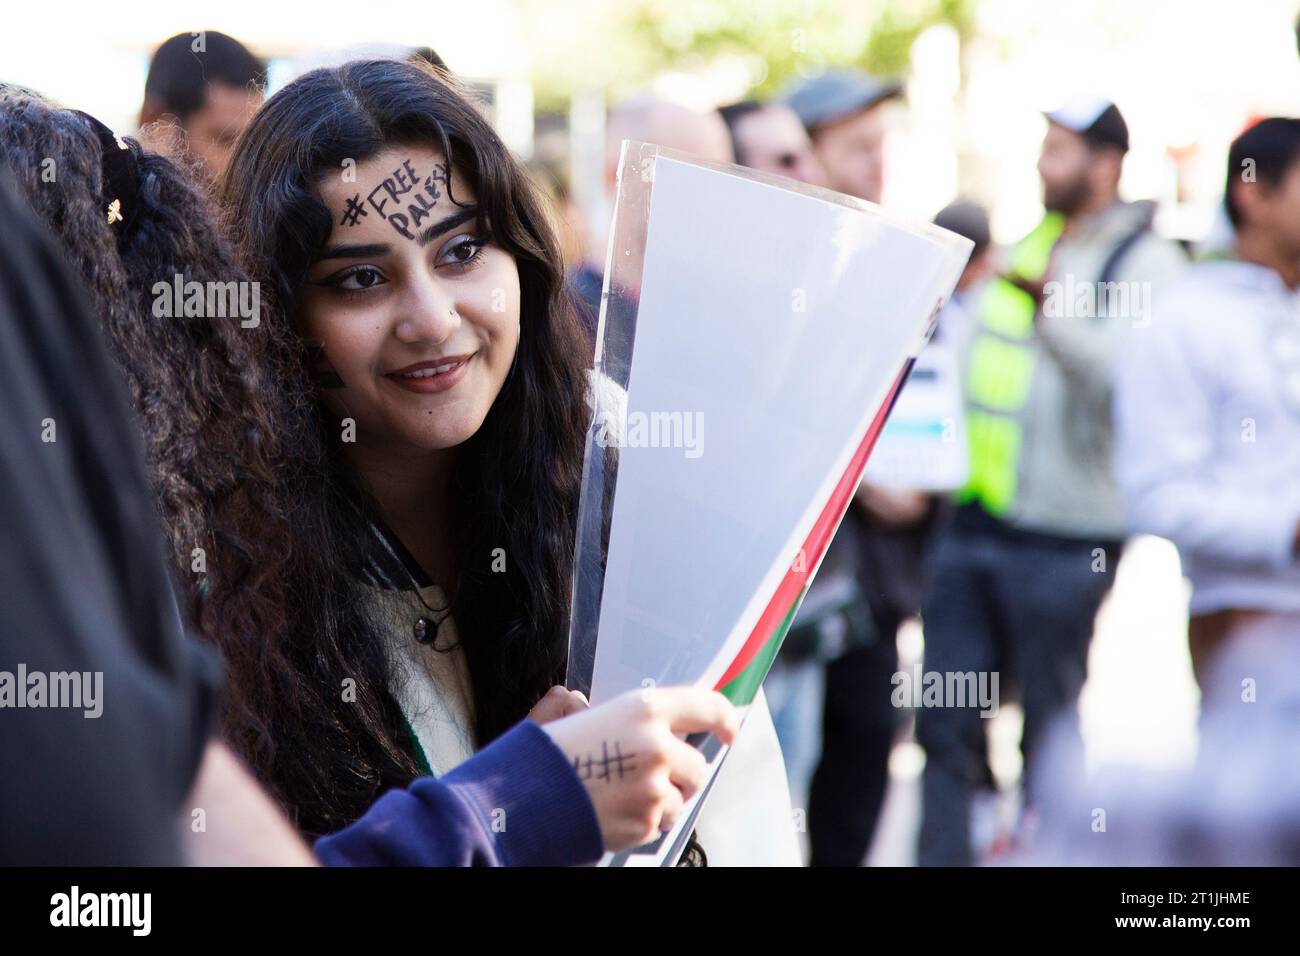 Free Palestine protest Exeter city centre - young Palestinian looking lady with hash tag '#FREEPALESTINE' black writing on forehead of face Stock Photo